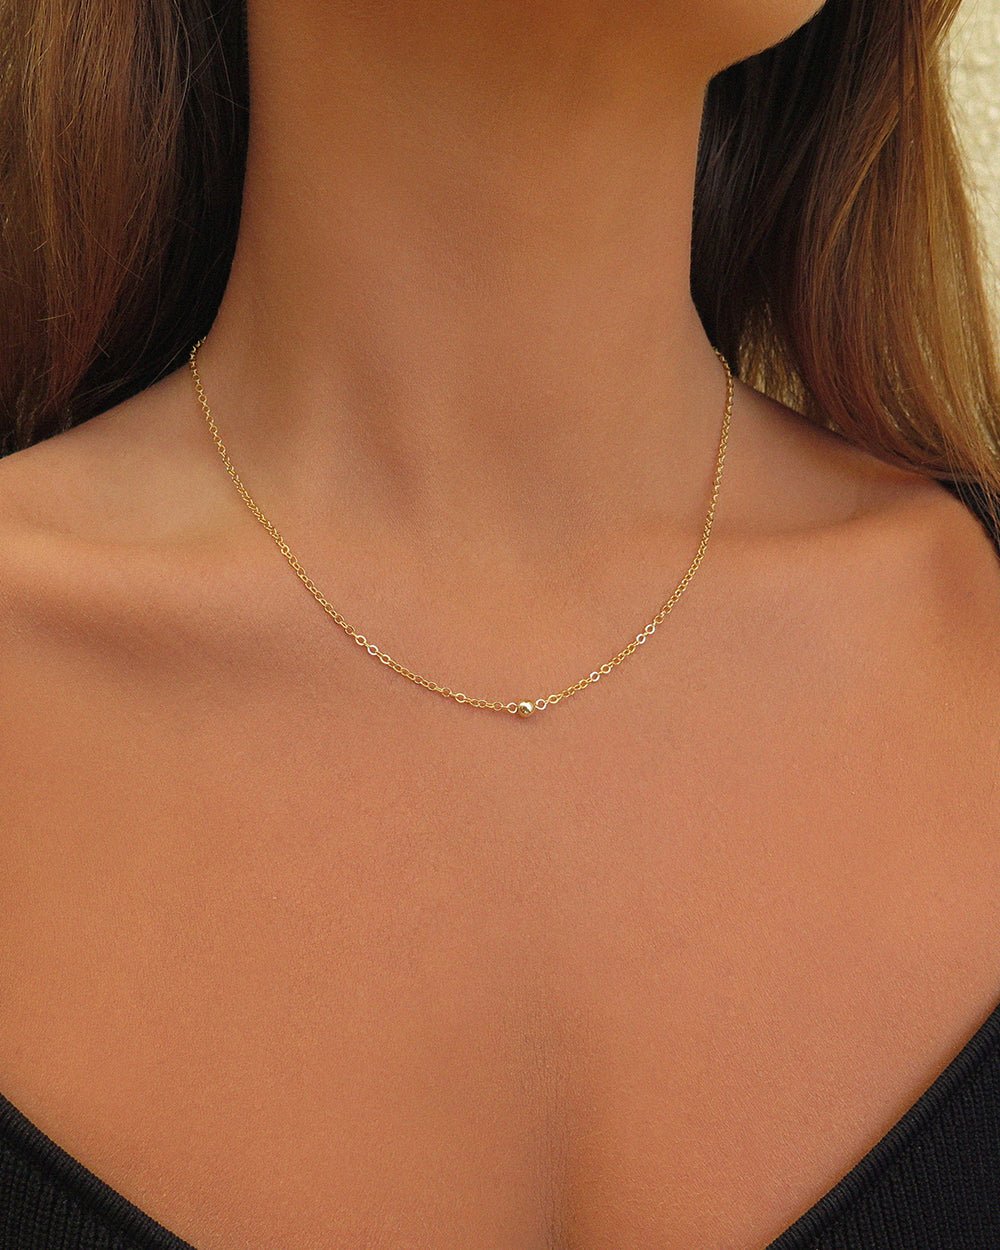 CLASSIC NECKLACE- 14k Yellow Gold - The Littl - Classic Chain - 37cm (choker) Necklaces